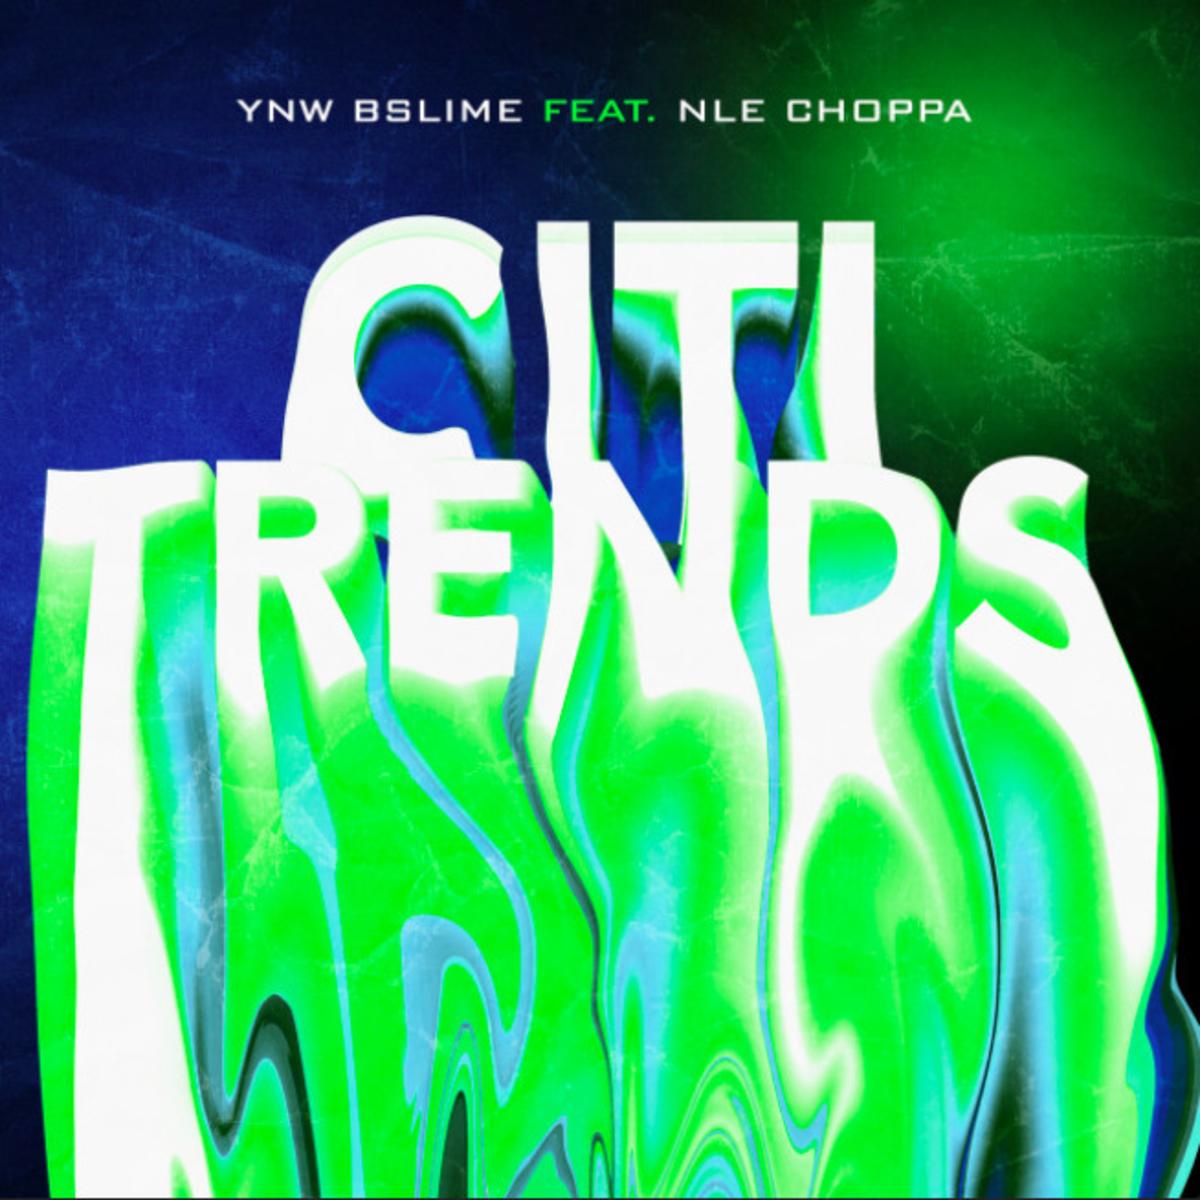 DOWNLOAD MP3: YNW BSlime - Citi Trends Ft. NLE Choppa